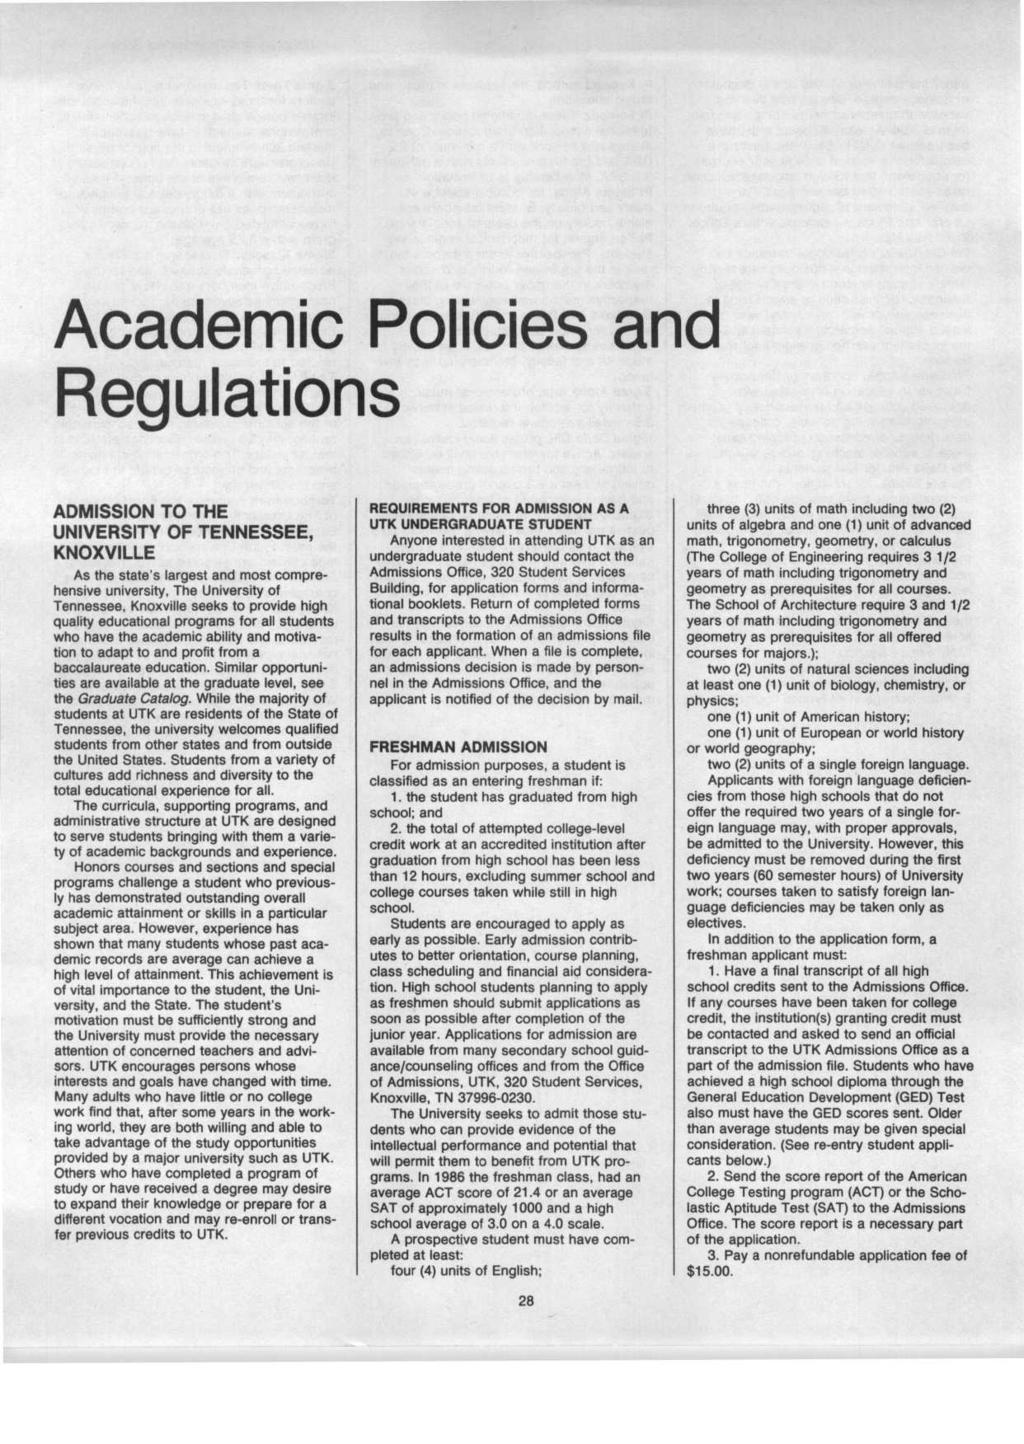 Academic Policies and Regulations ADMISSION TO THE UNIVERSITY OF TENNESSEE, KNOXVILLE As the state's largest and most comprehensive university, The University of Tennessee, Knoxville seeks to provide